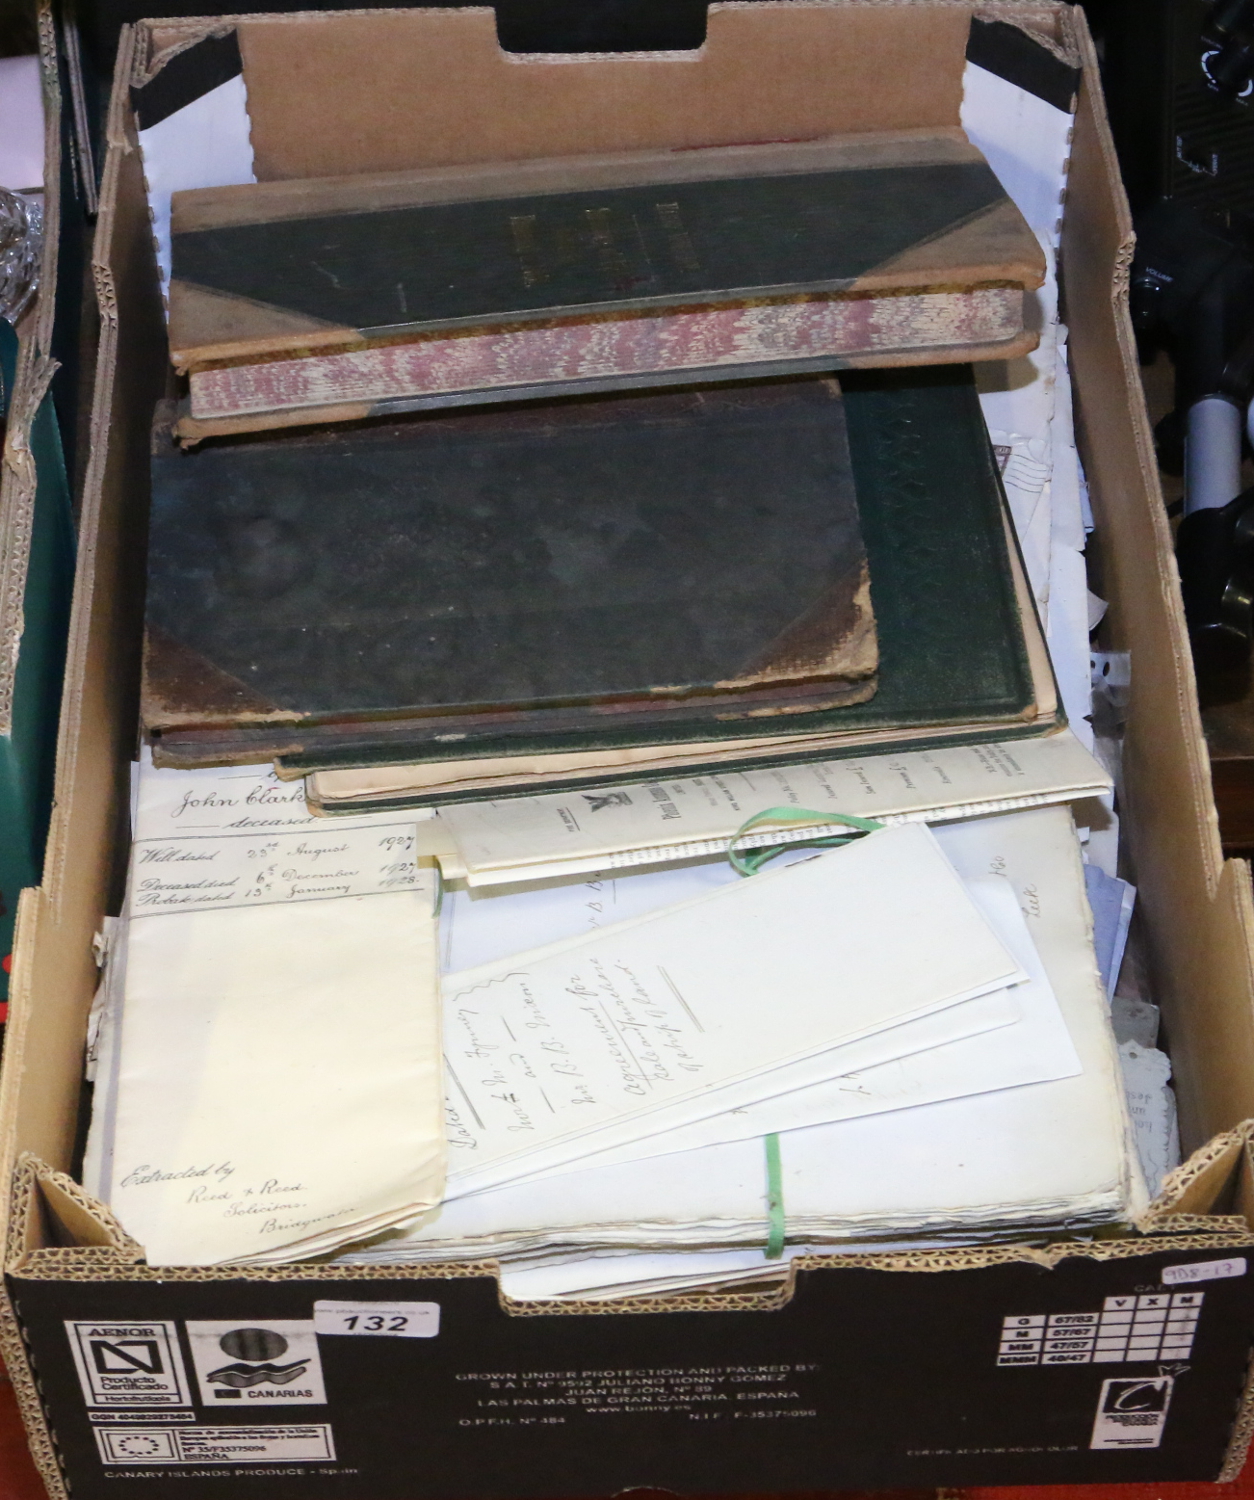 Private Family Collections Scanning Oxfordshire UK